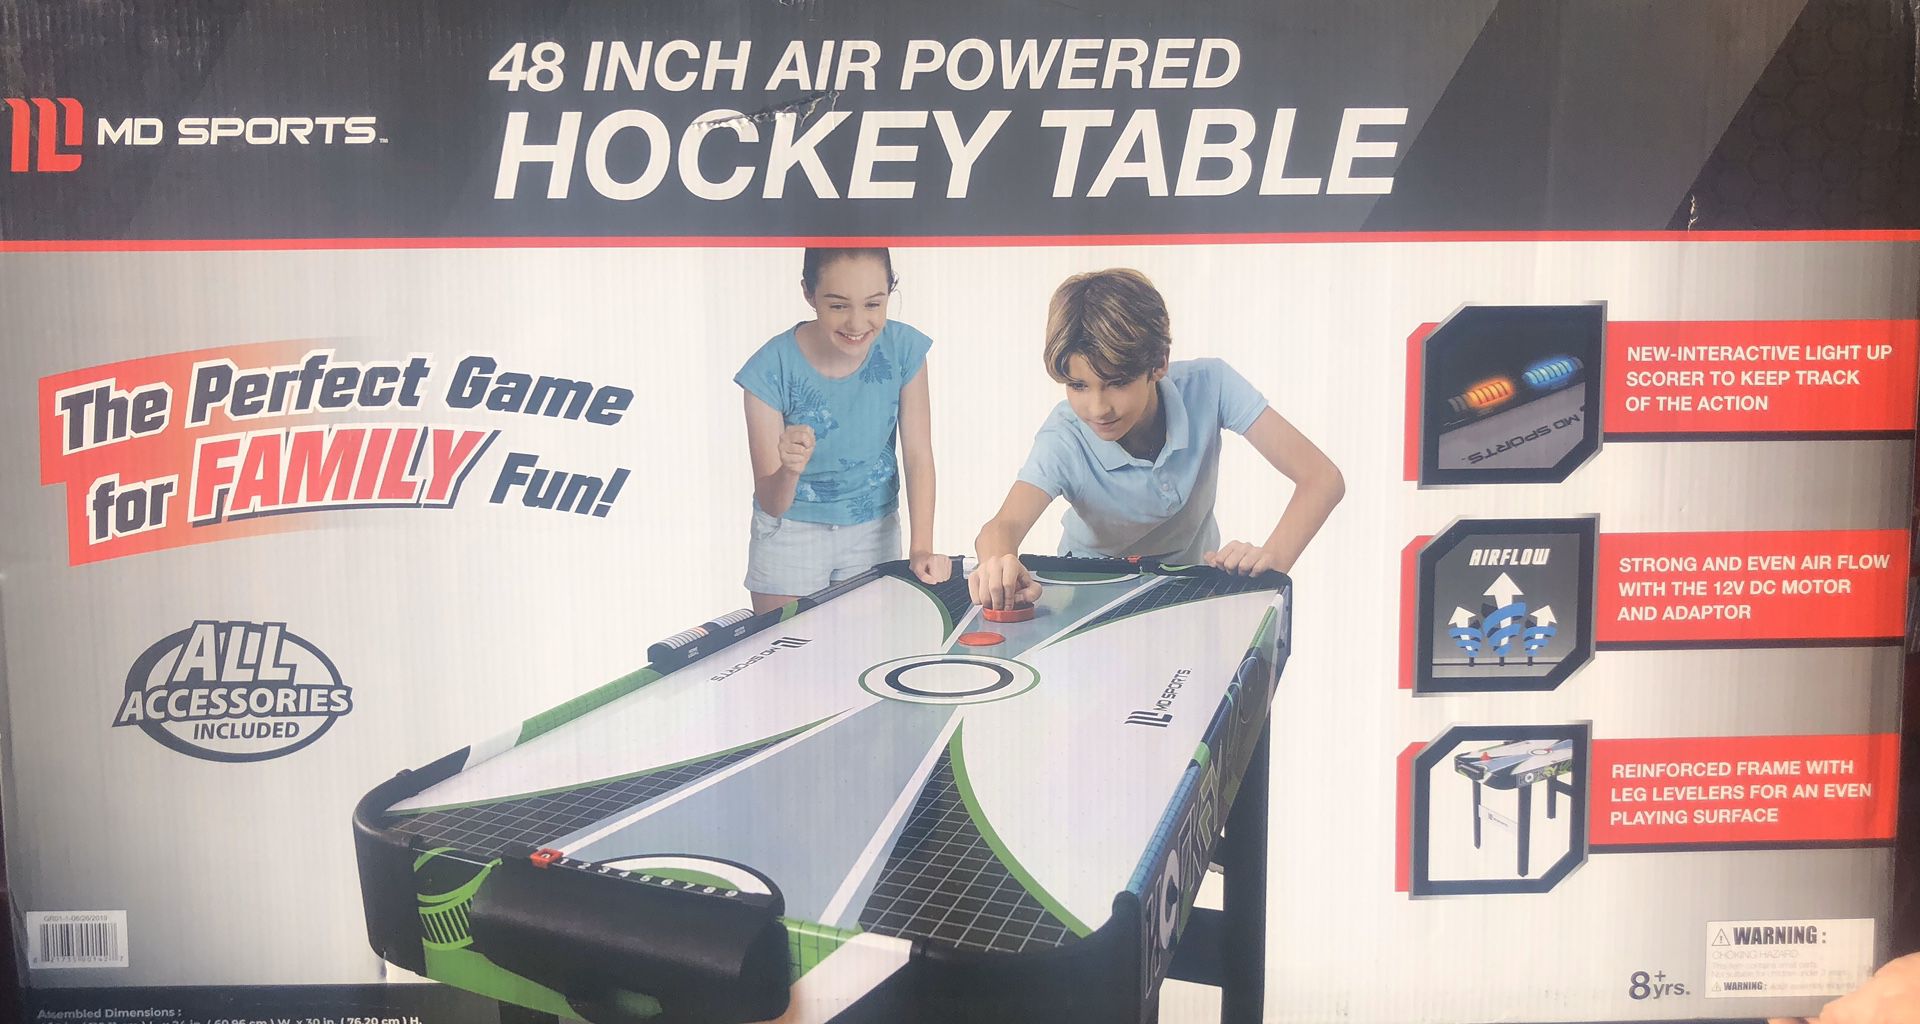 MD Sports 48 inch Air Powered Hockey Table